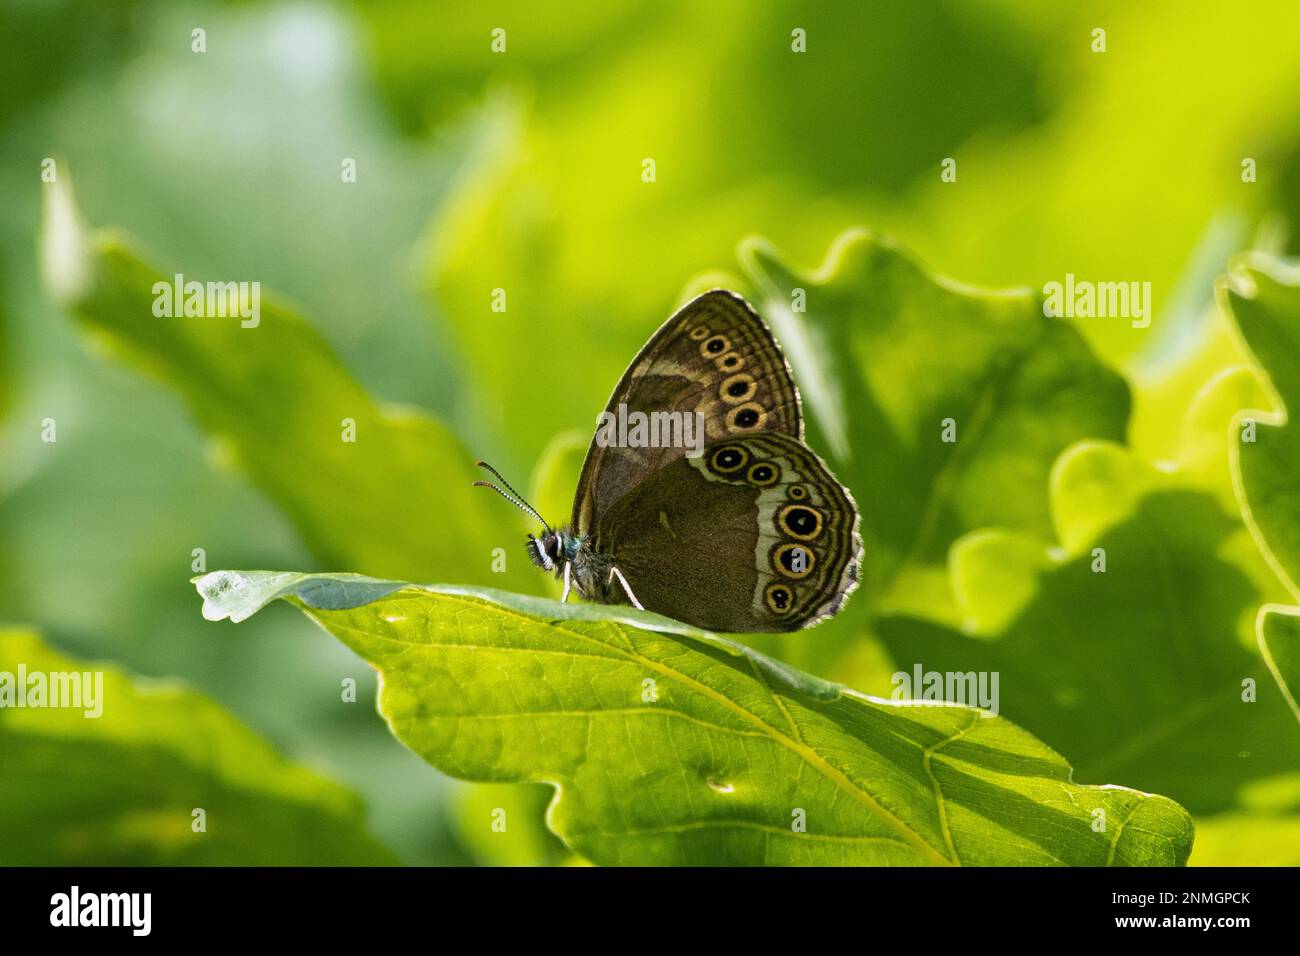 Yellow Ring butterfly butterfly with closed wings sitting on green leaf looking left Stock Photo